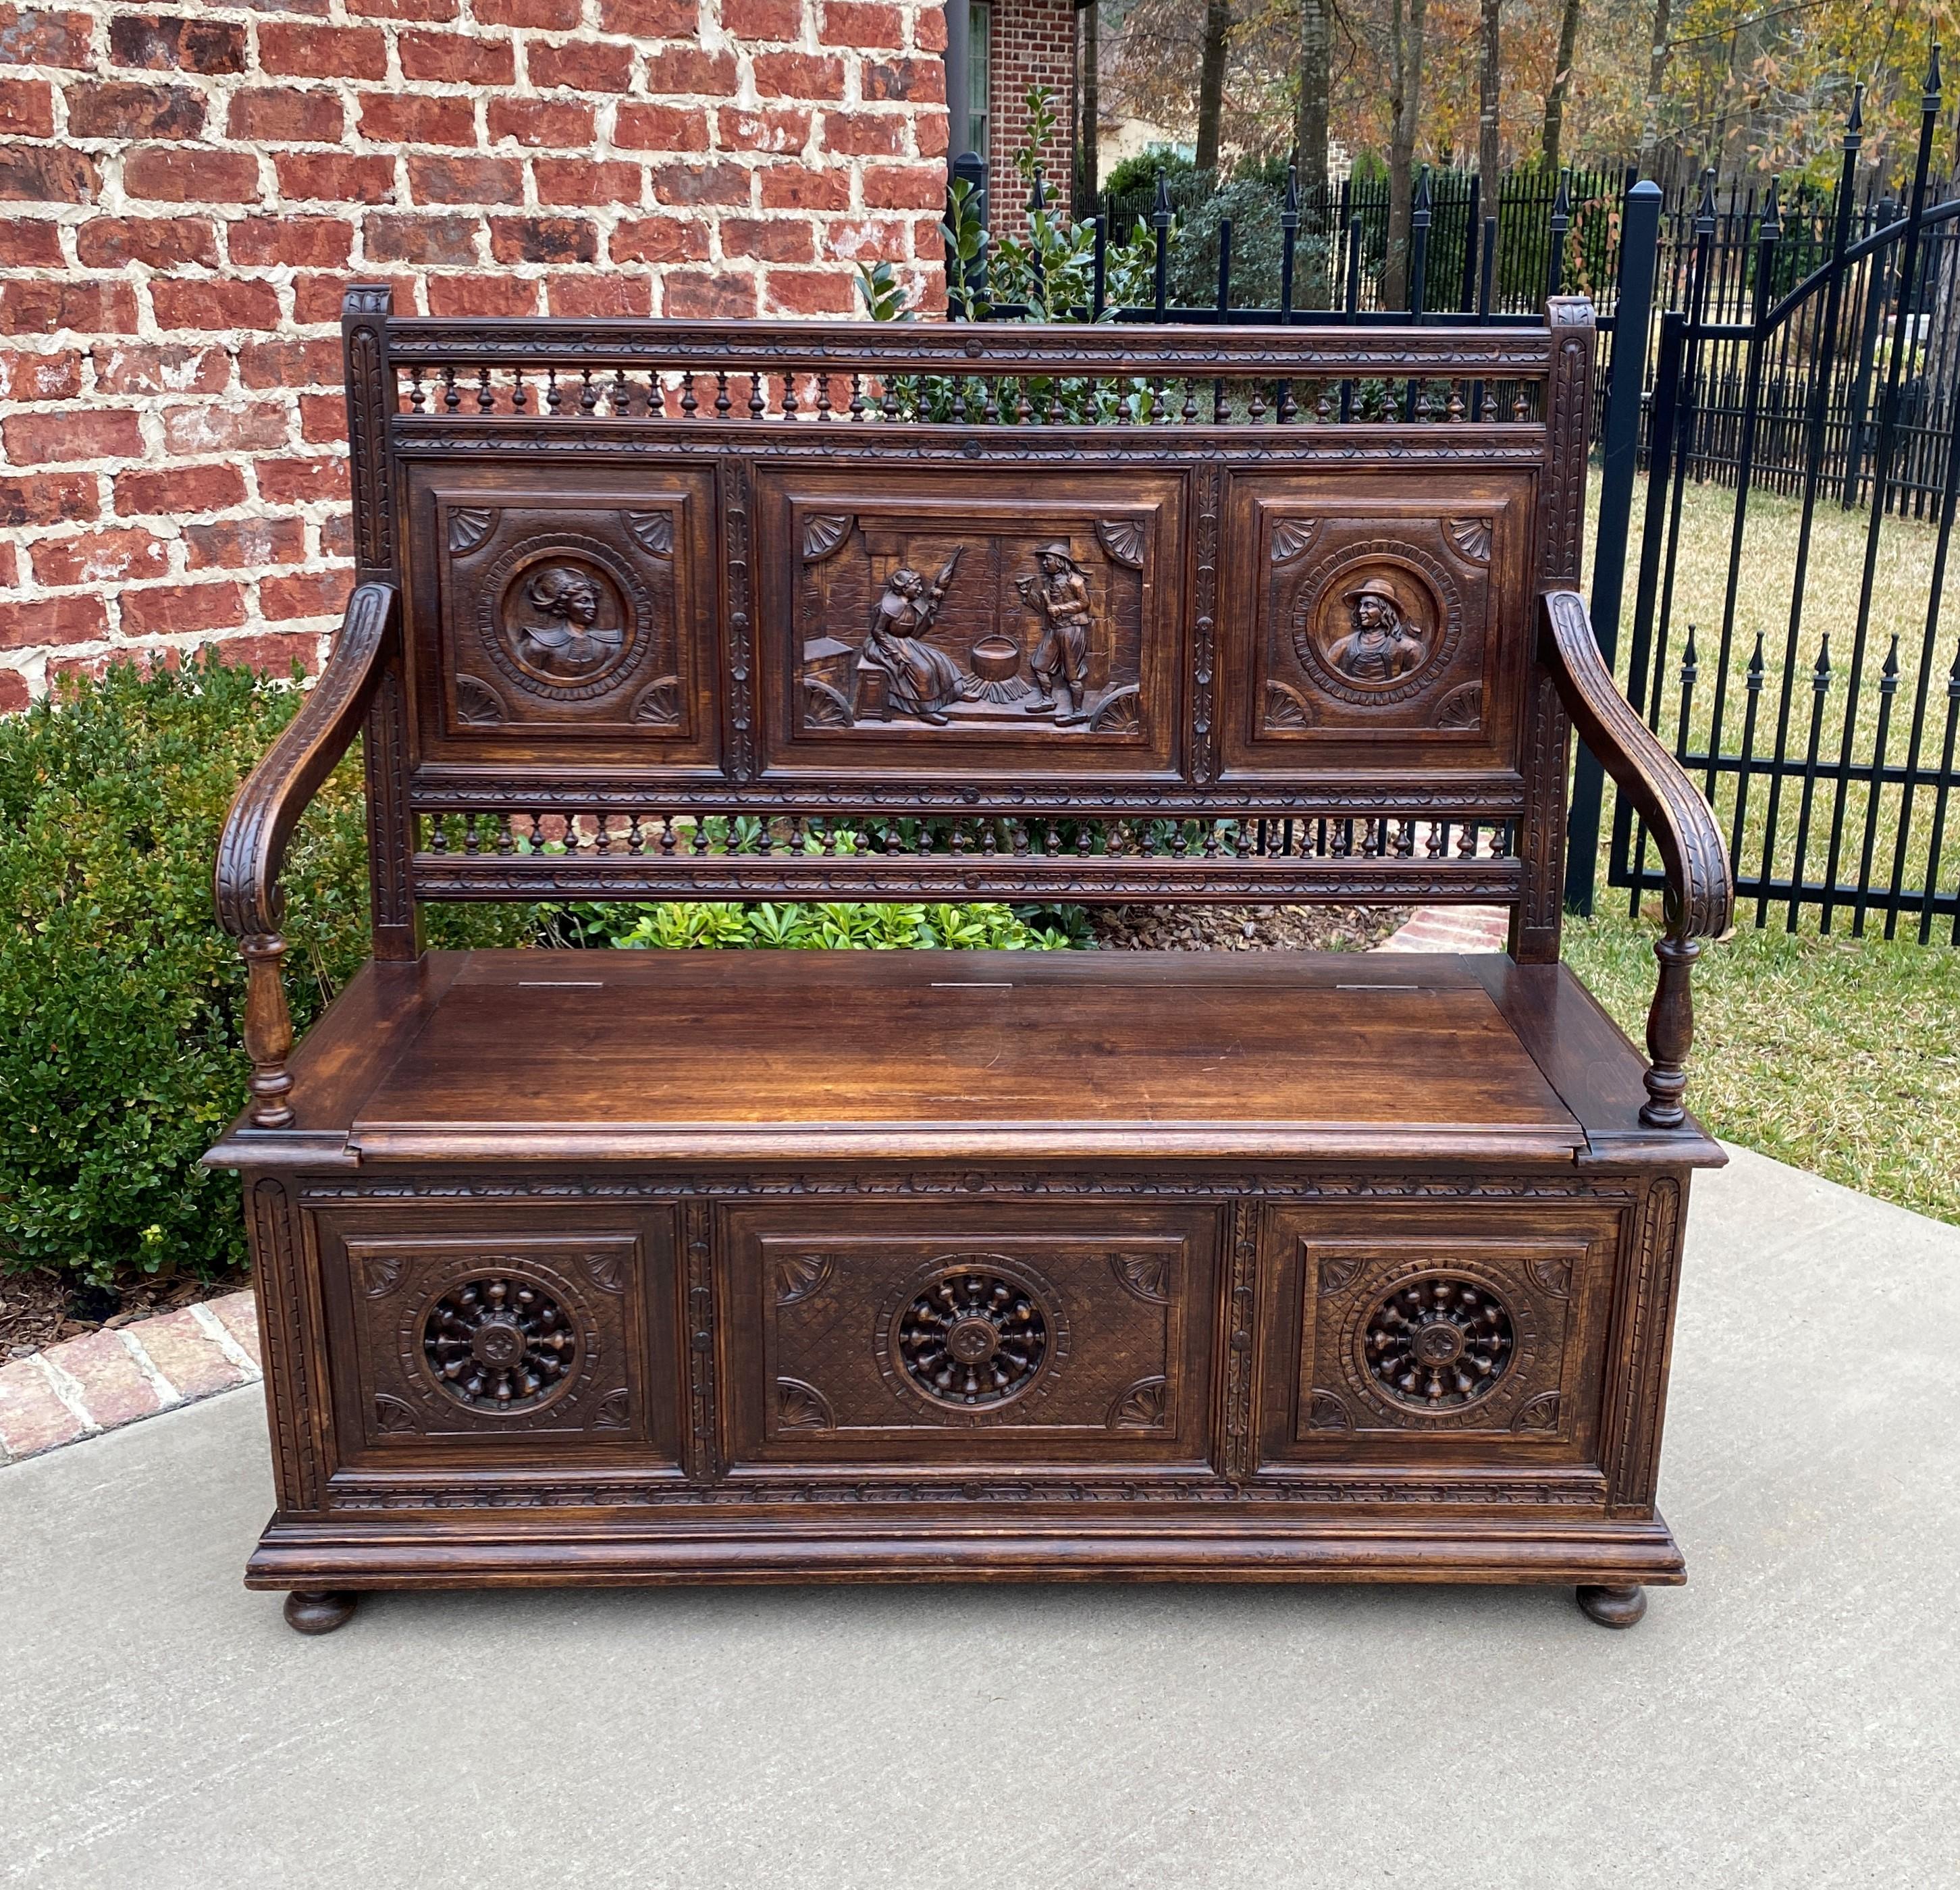 French Provincial Antique French Breton Bench Settee Entry Hall Brittany Carved Oak Banquette For Sale